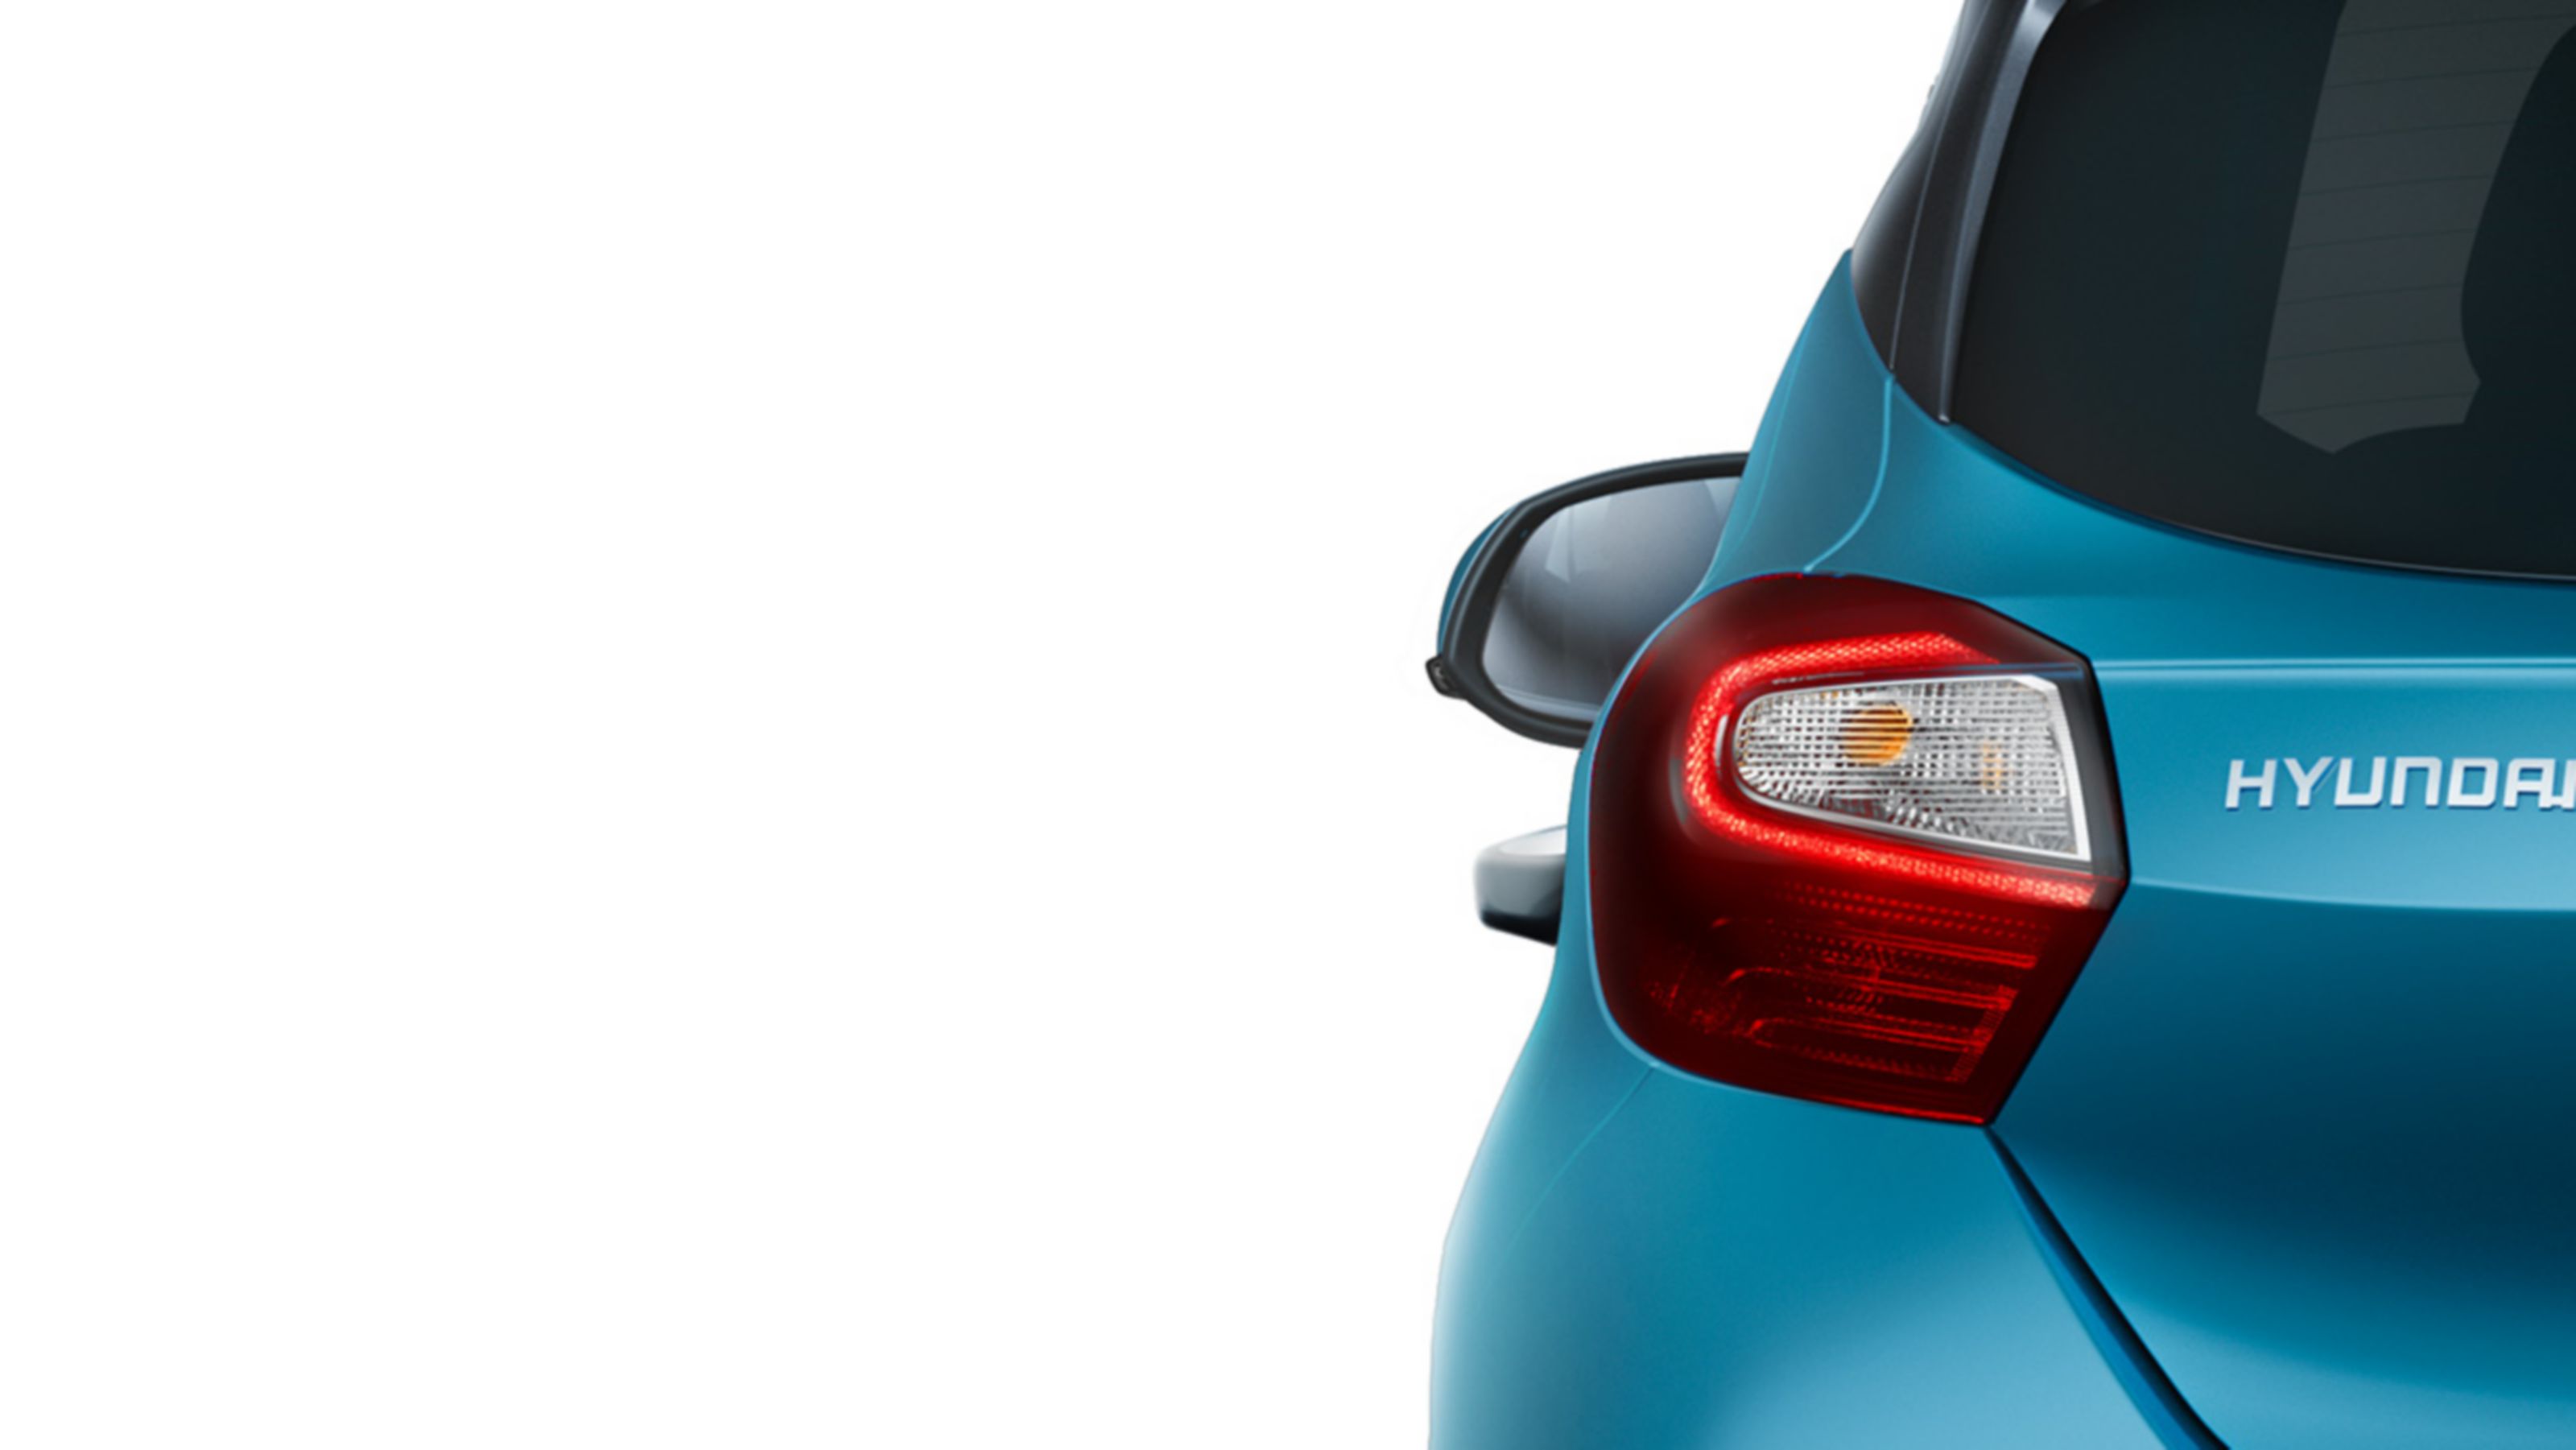 The rear combination lamps of the Hyundai i10.